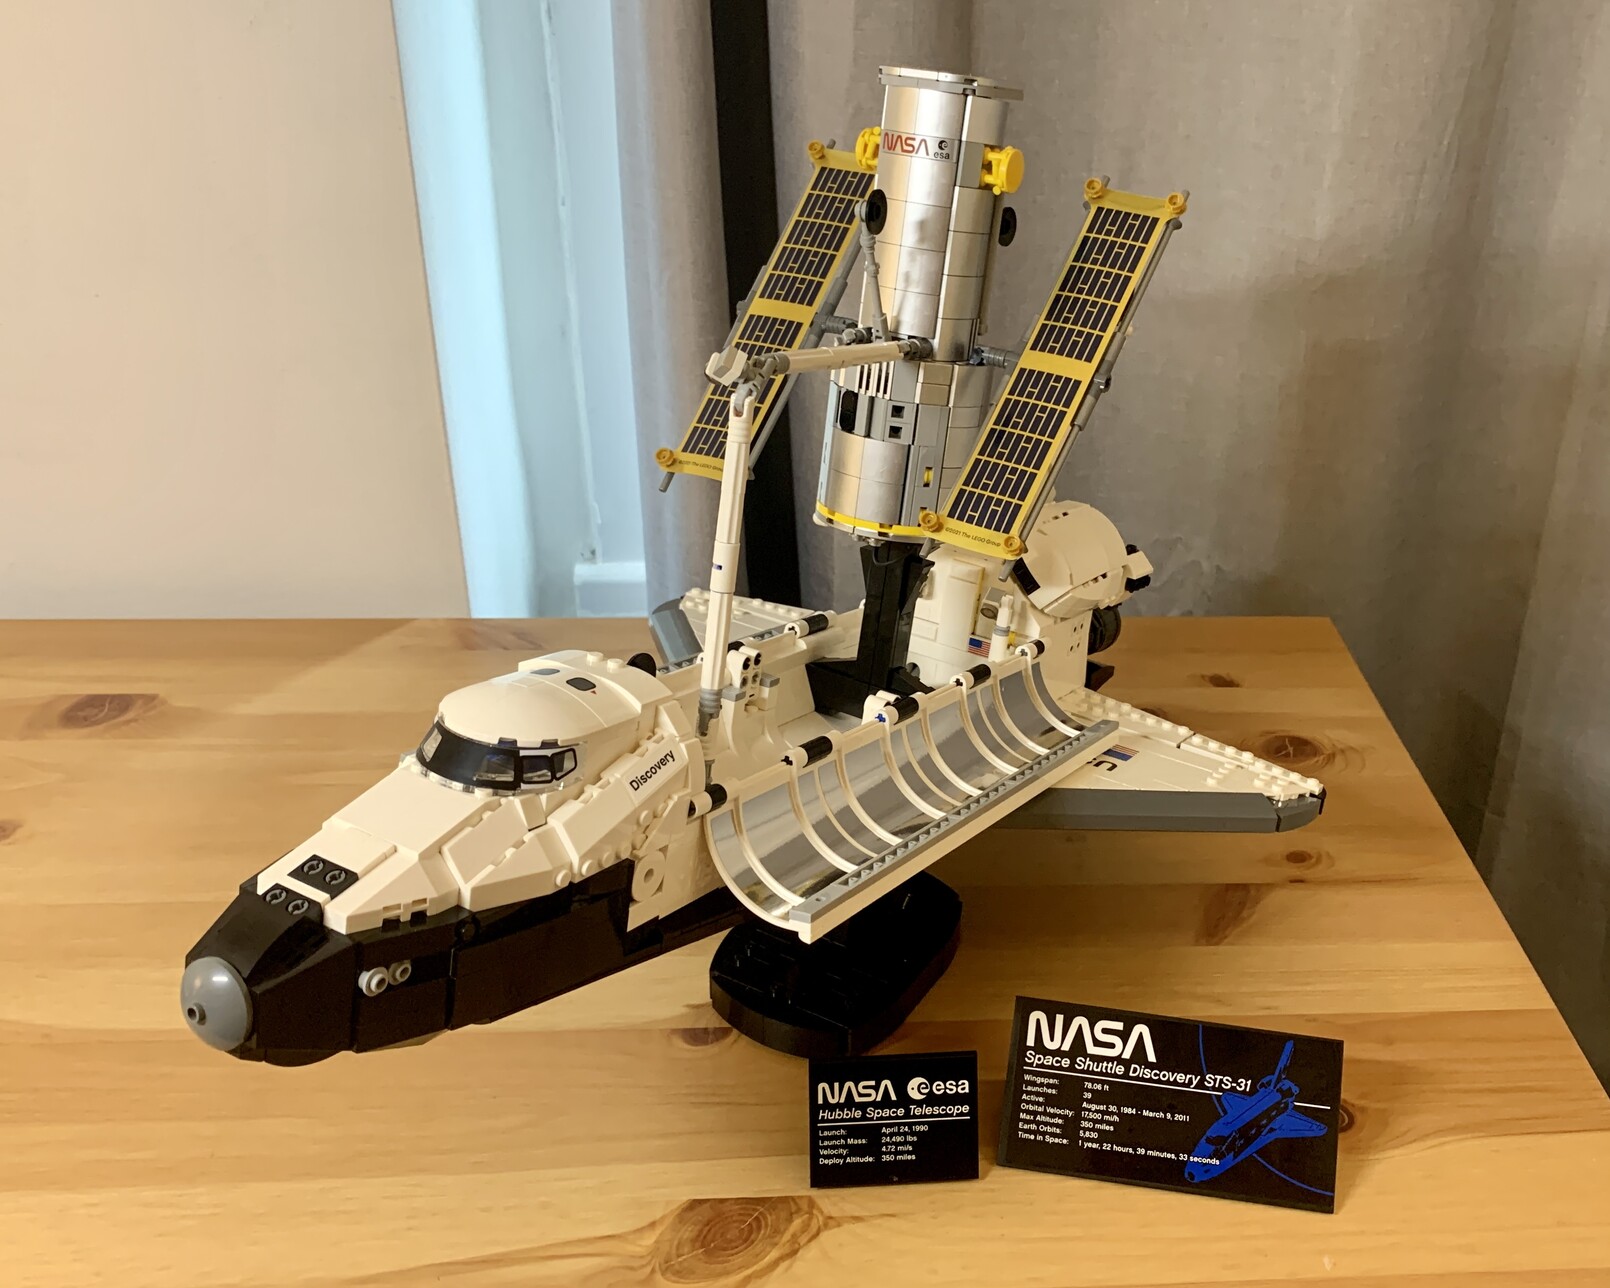 Lego Space Shuttle Discovery facing with its nose bottom left on a stand. Its cargo bay doors are open showing the Hubble space telescope above it. The Hubble is on a black stand and is pointing upwards. Its solar panels are deployed and it is connected to the Space Shuttle’s manipulator arm. In front of the model are two plaques with details of the two space craft.